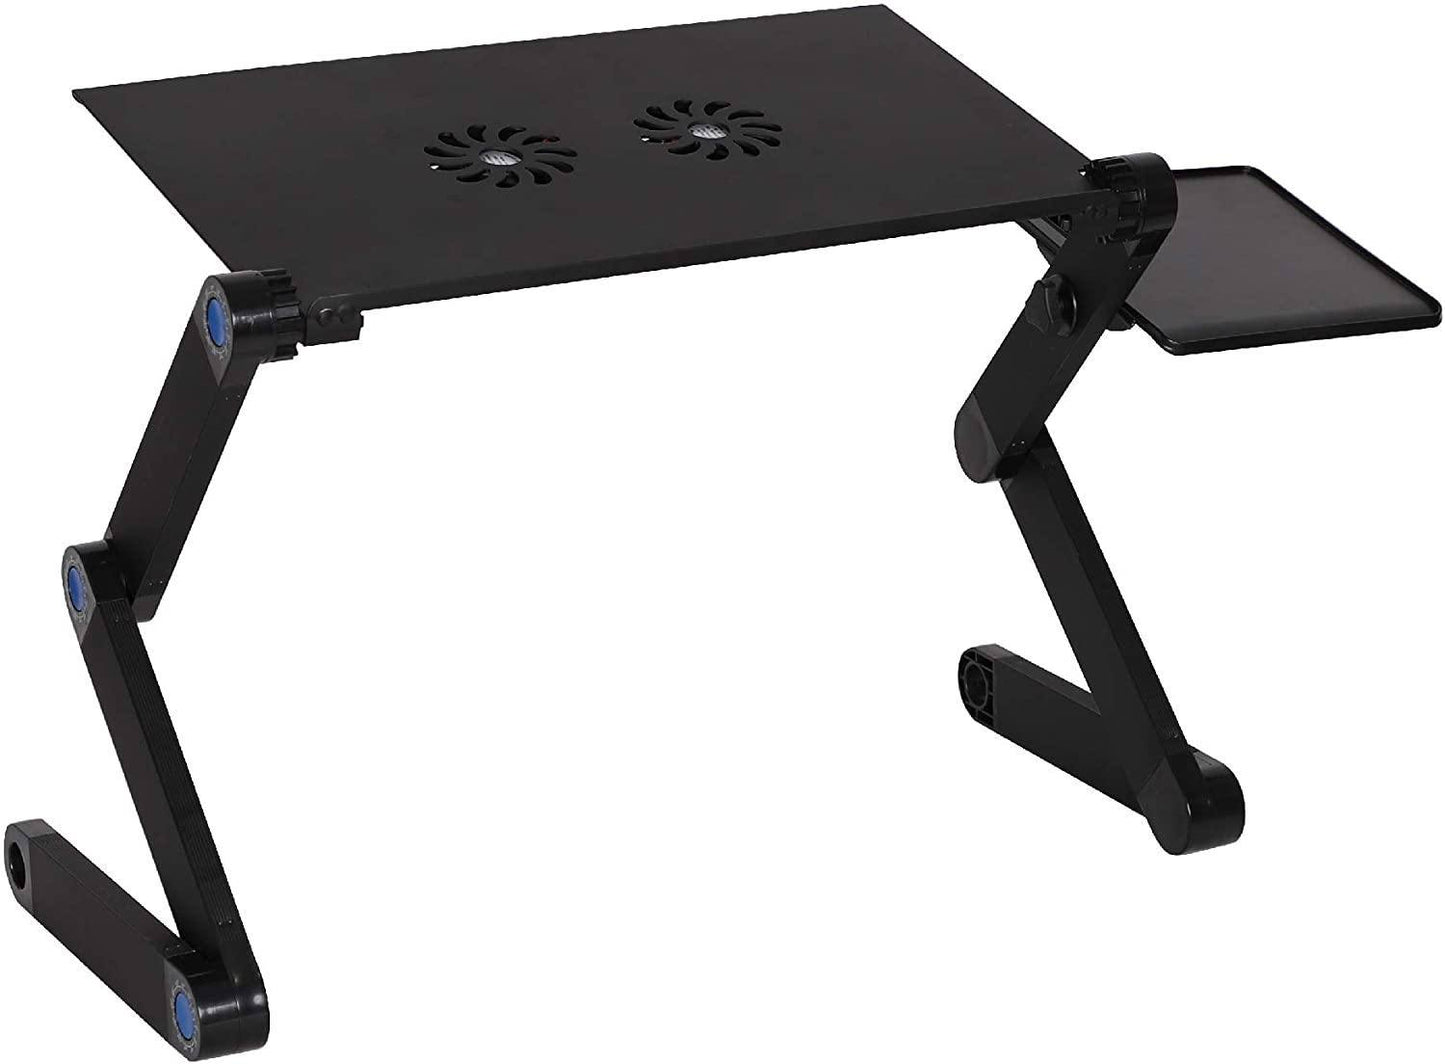 Aluminum Laptop Desk with Adjustable Features and CPU Cooling Fans